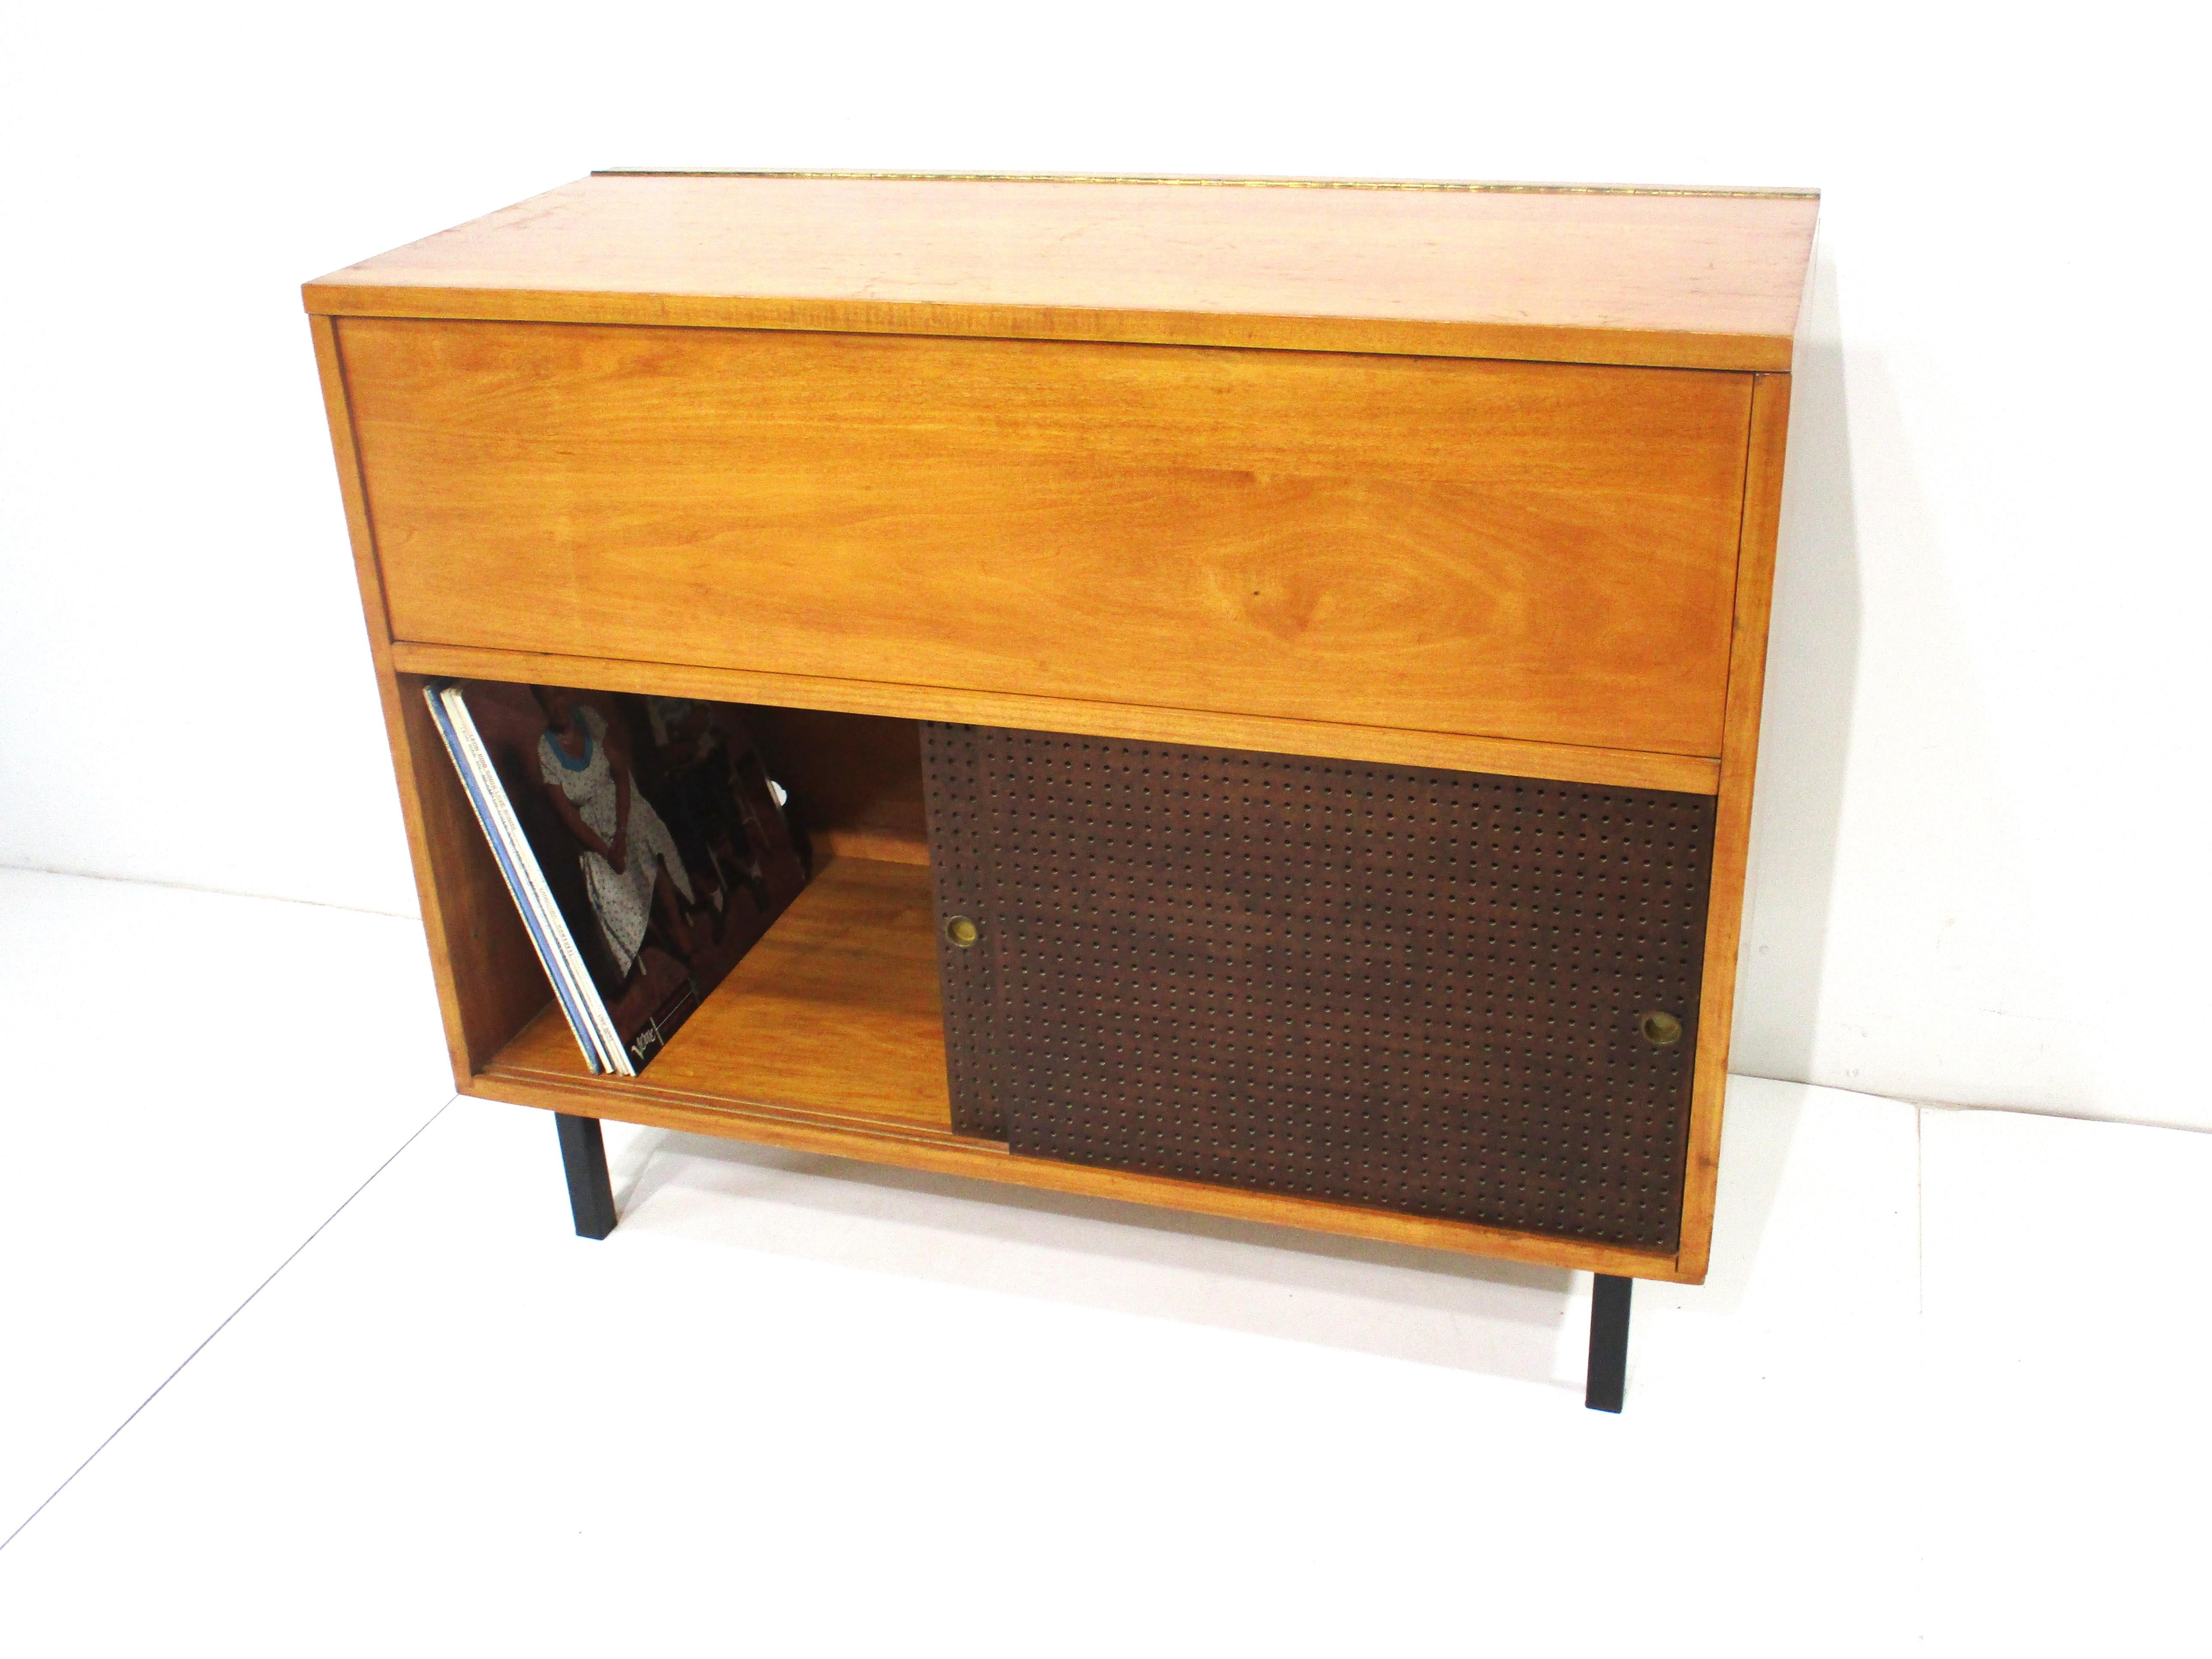 A honey toned solid maple stereo cabinet with pull up top revealing an area for your stereo and turntable having pre cut holes for wiring . The lower area has two perforated sliding doors and storage that will fit your vinyl collection . Sitting on